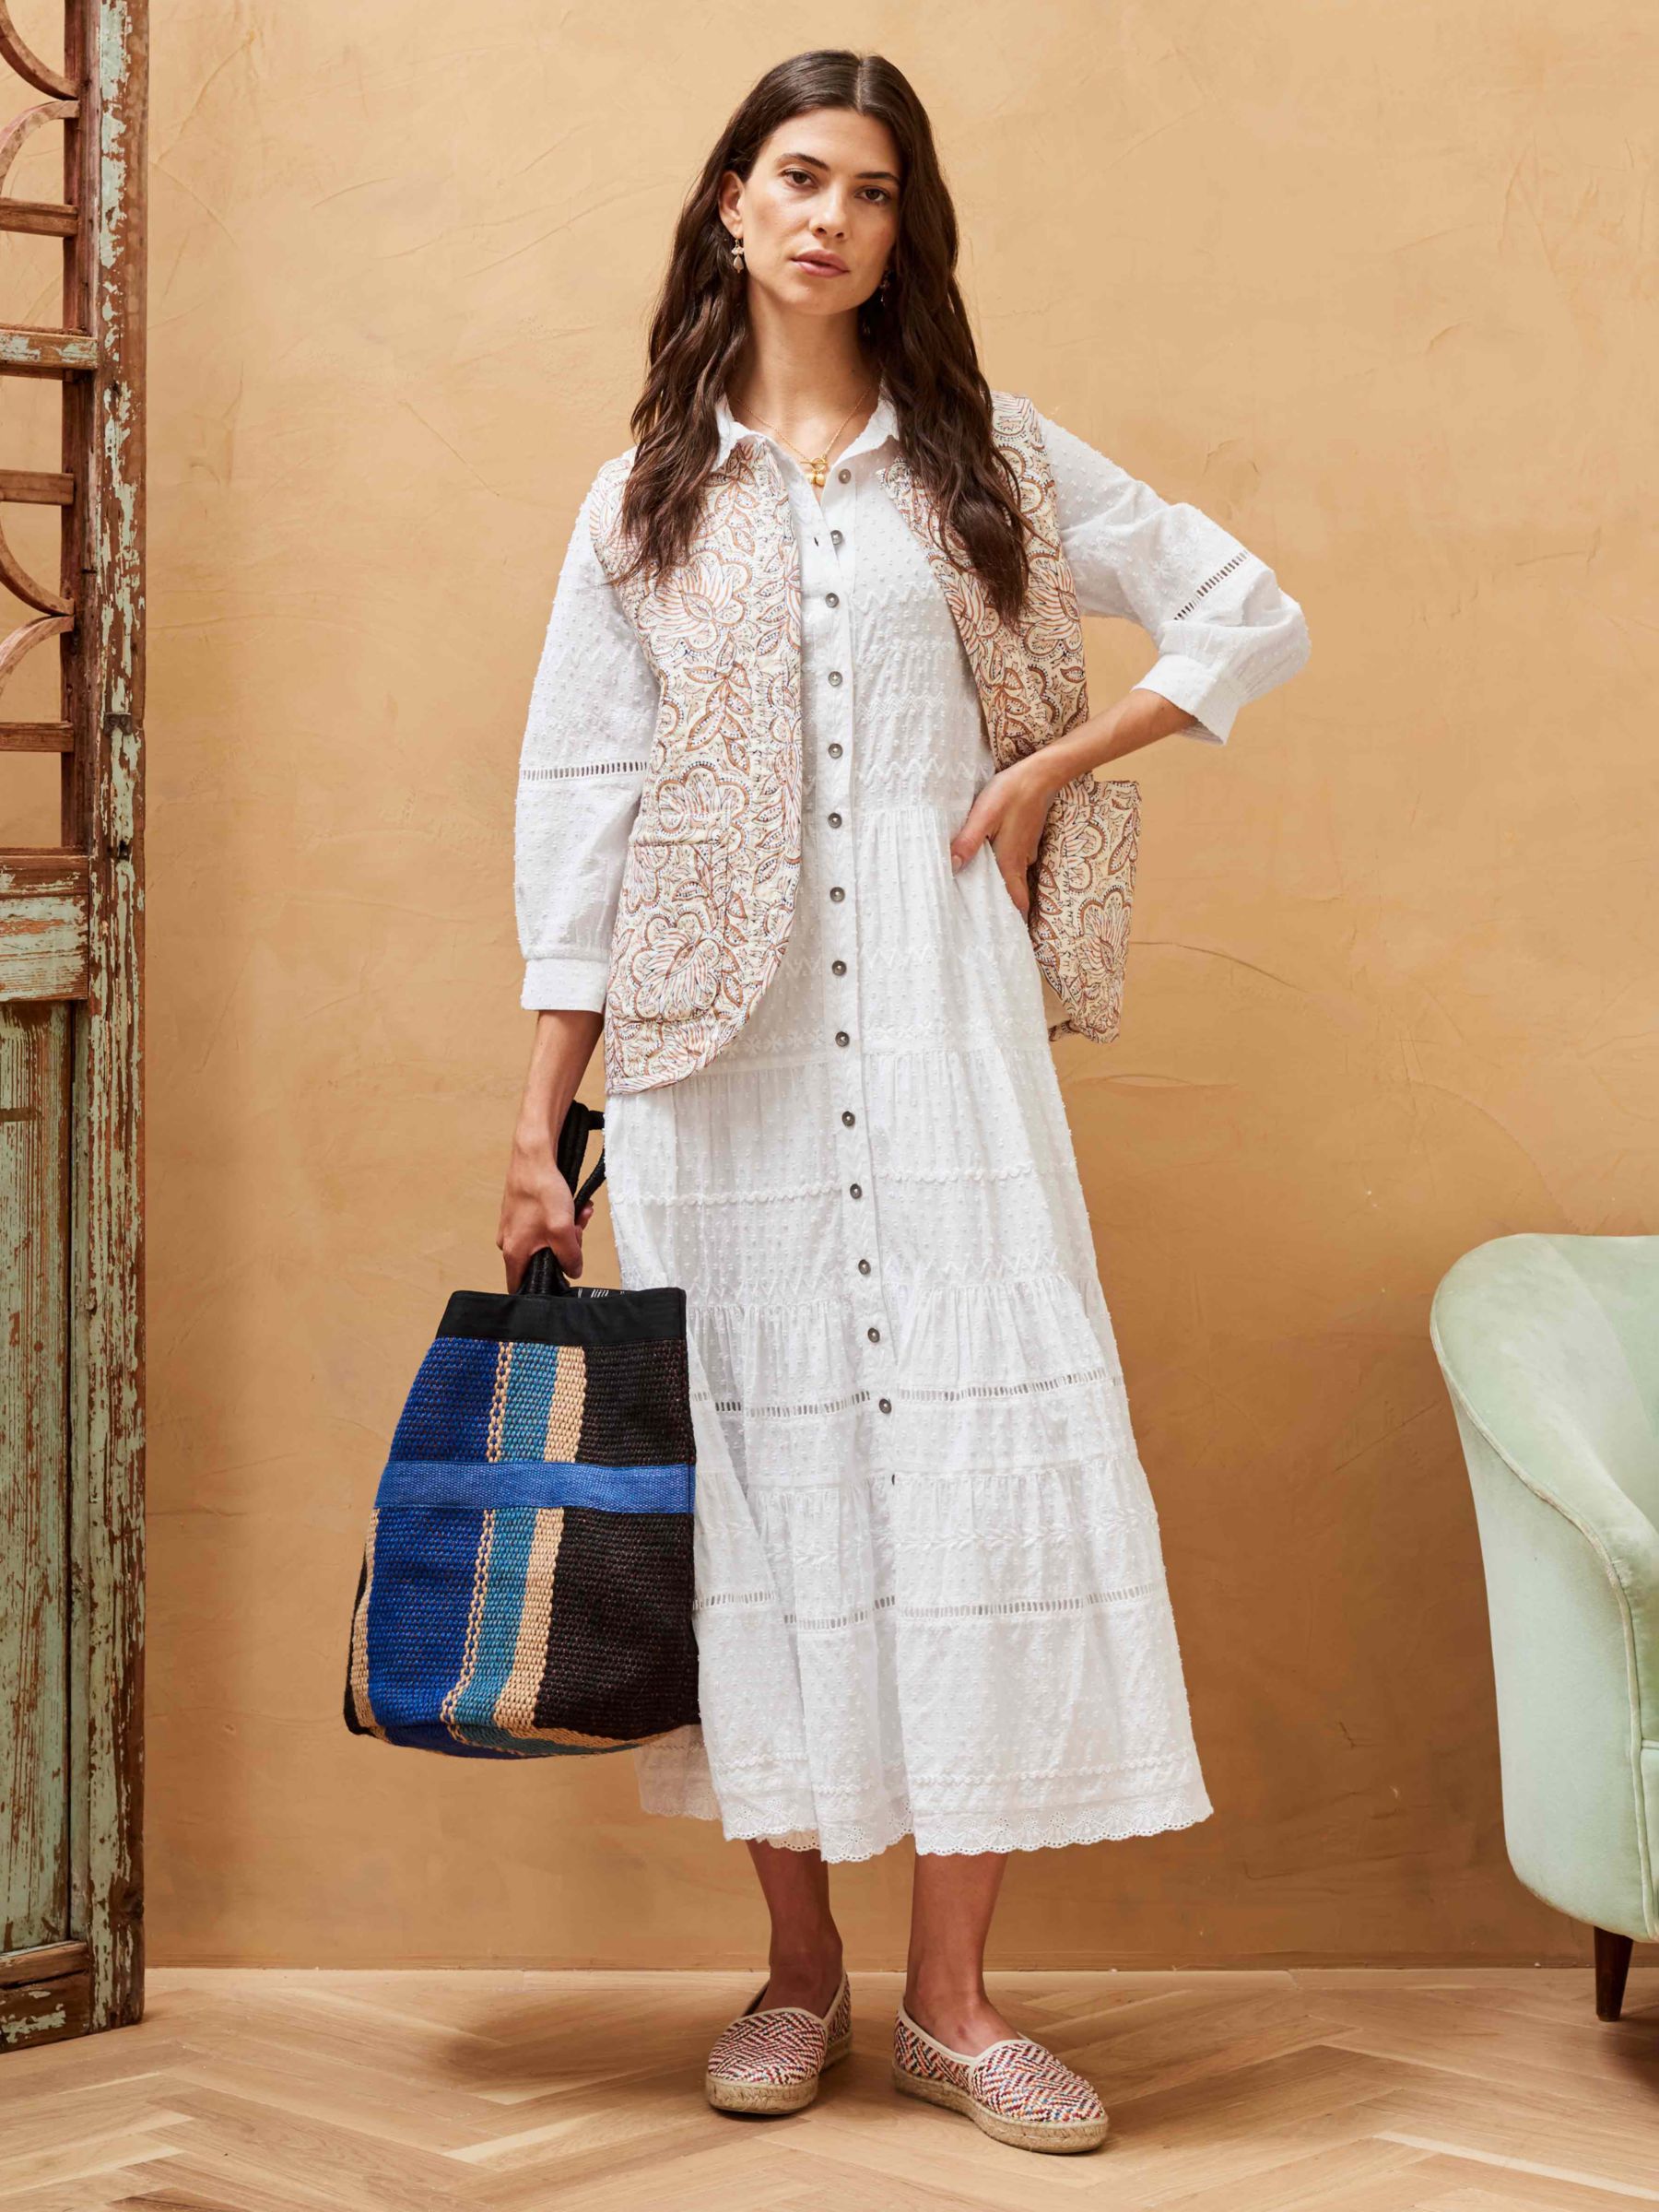 Buy Brora Organic Cotton Embroidered Tiered Shirt Dress, White Online at johnlewis.com